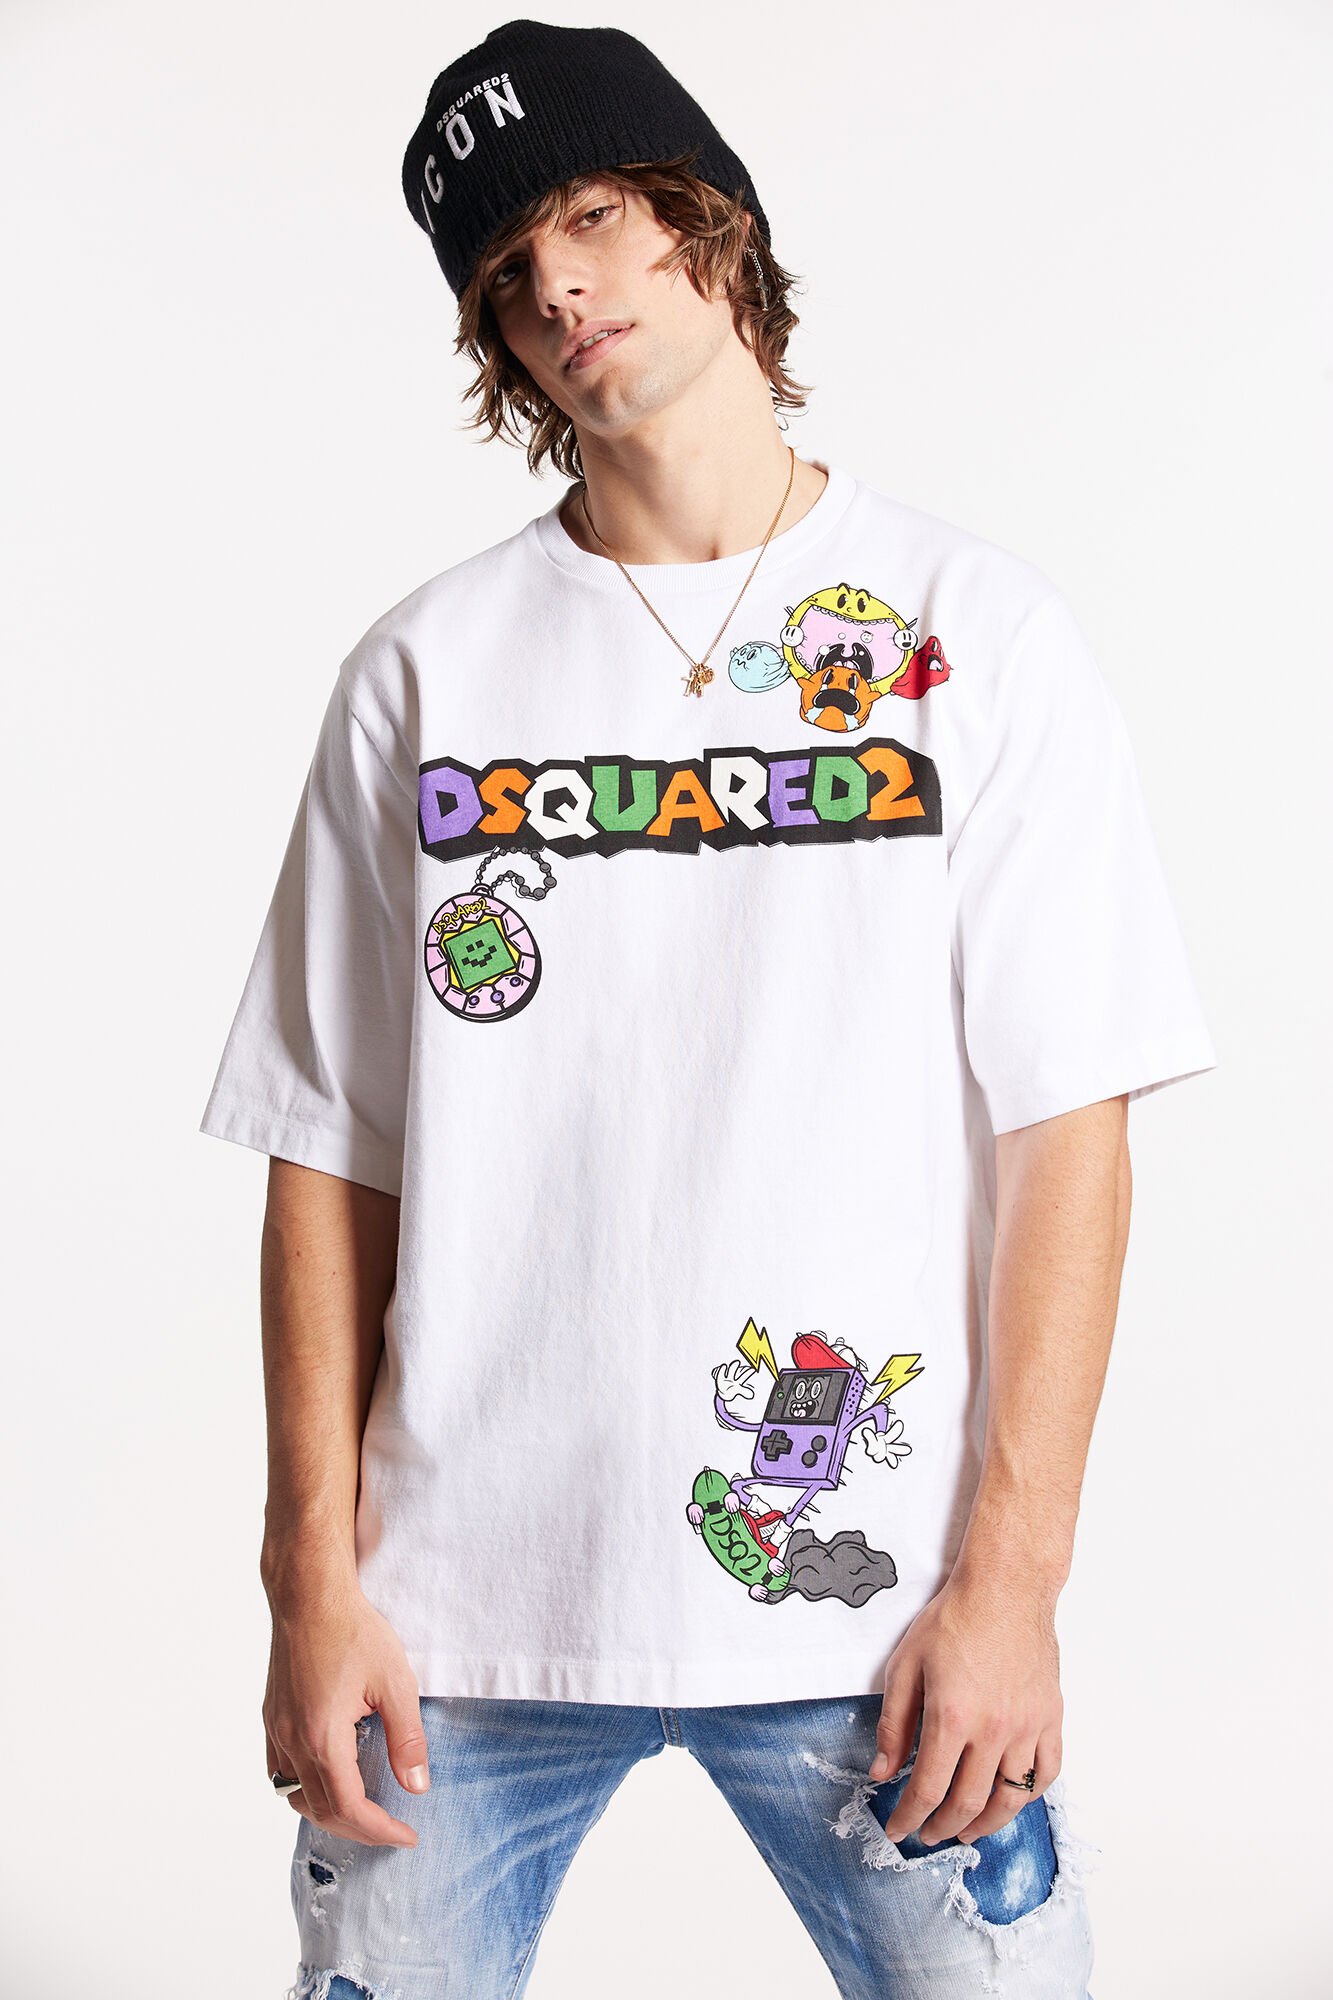 D SQUARED2 Tシャツ